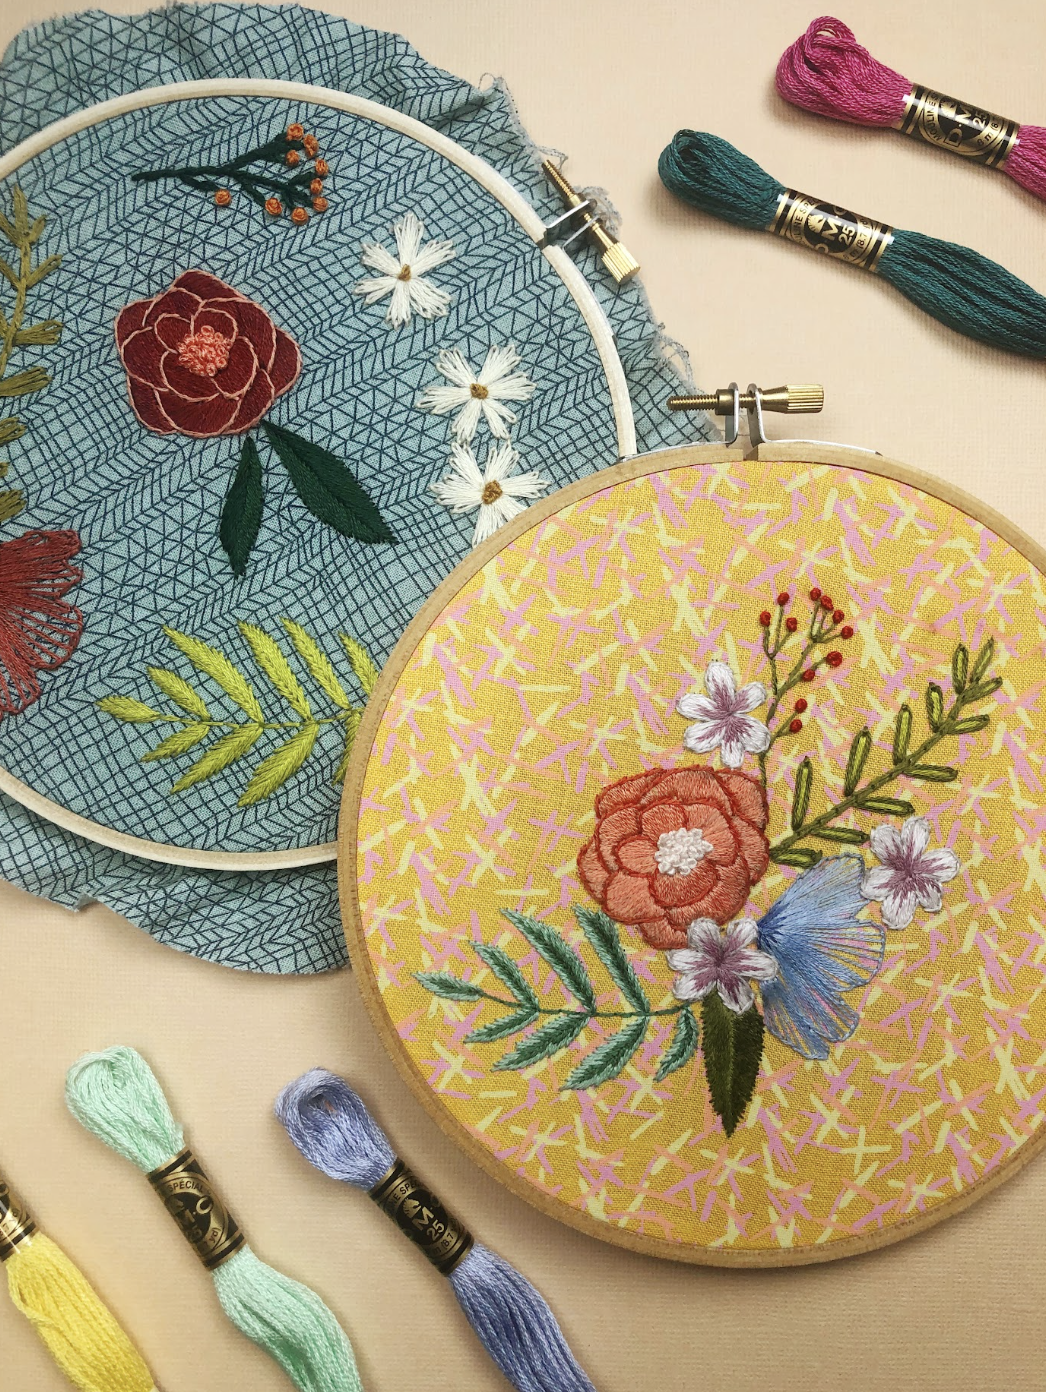 EMBROIDERY CLASS: Floral Embroidery Basics